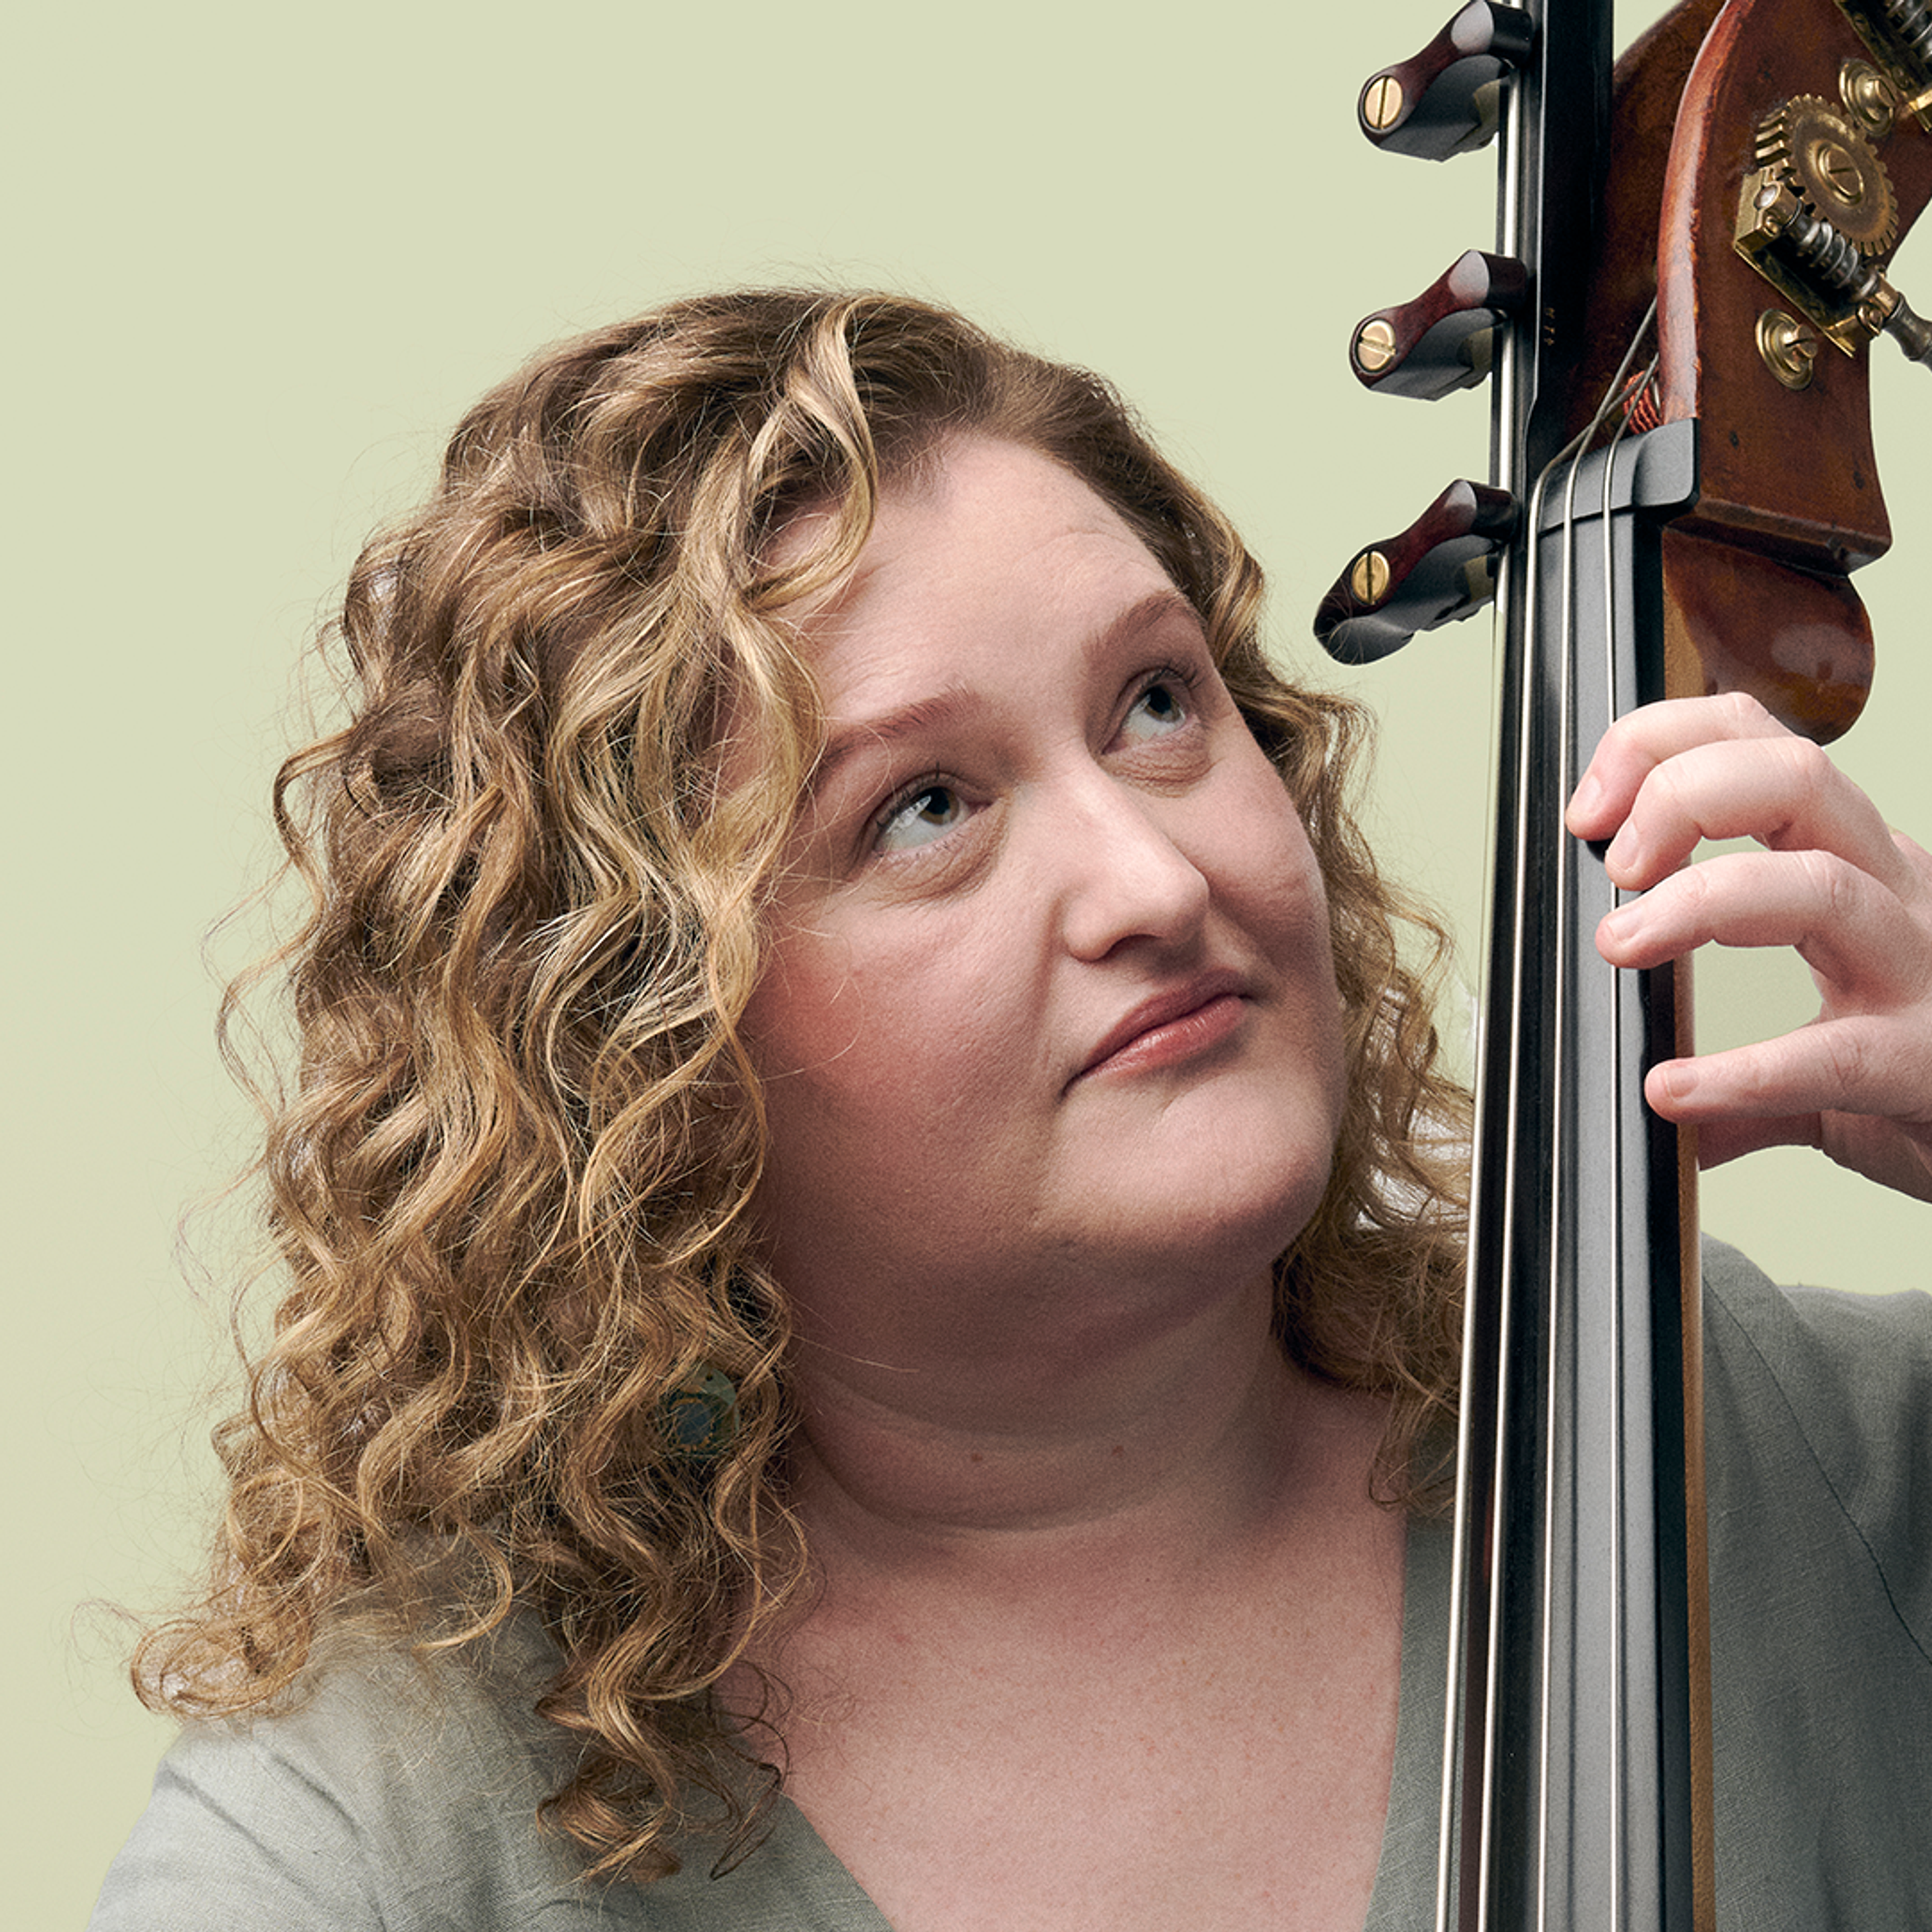 A woman with curly hair stands holding her cello, looking upwards